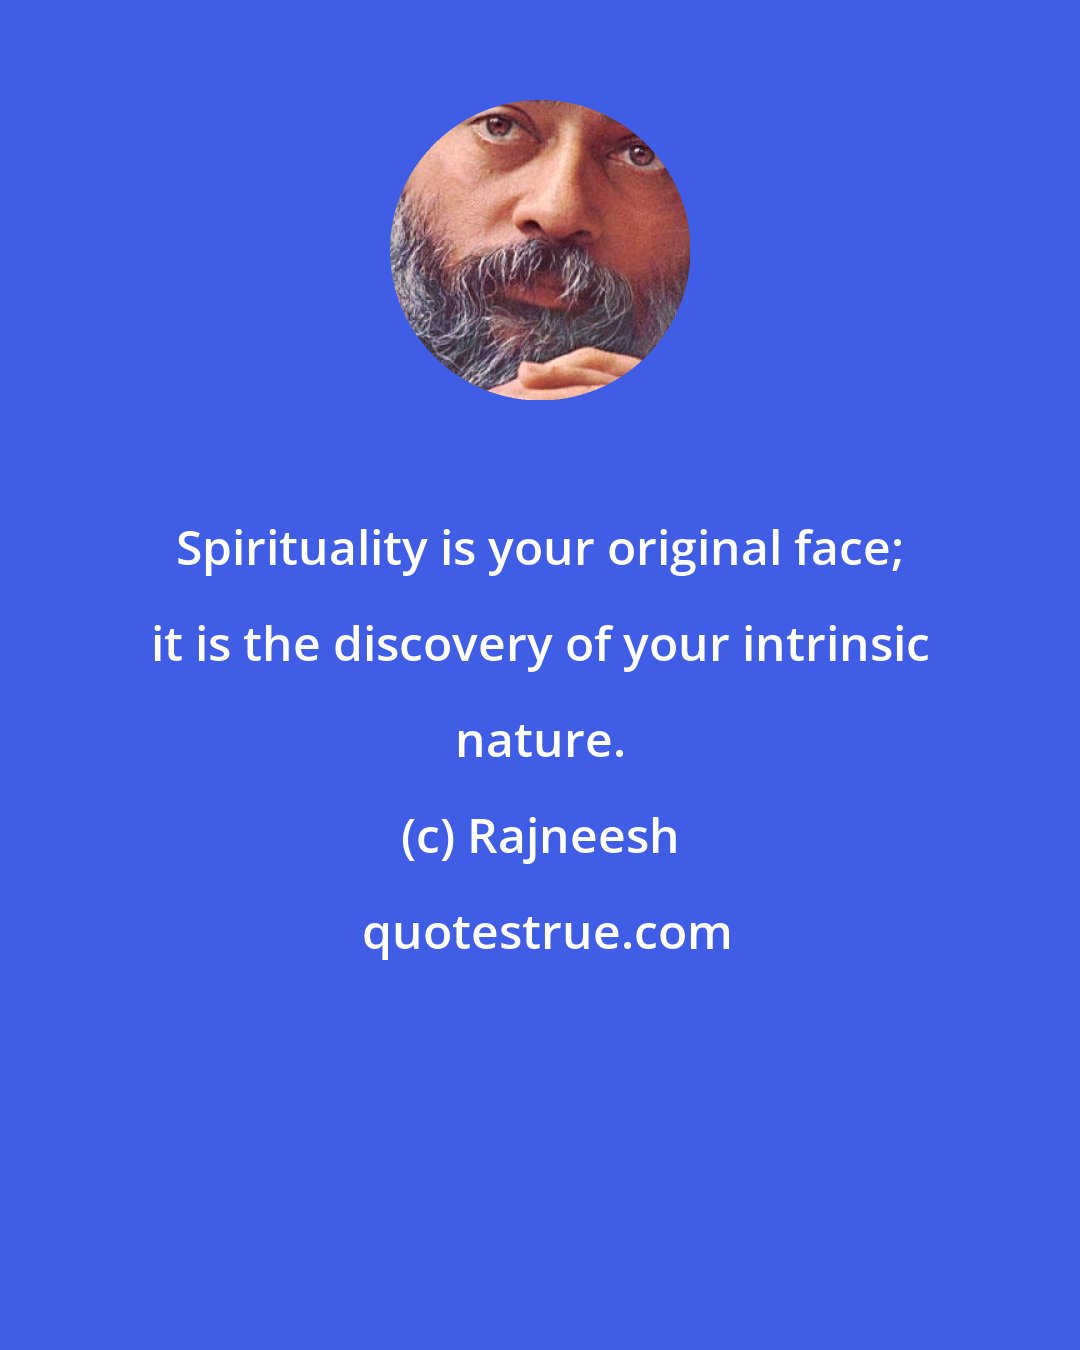 Rajneesh: Spirituality is your original face; it is the discovery of your intrinsic nature.